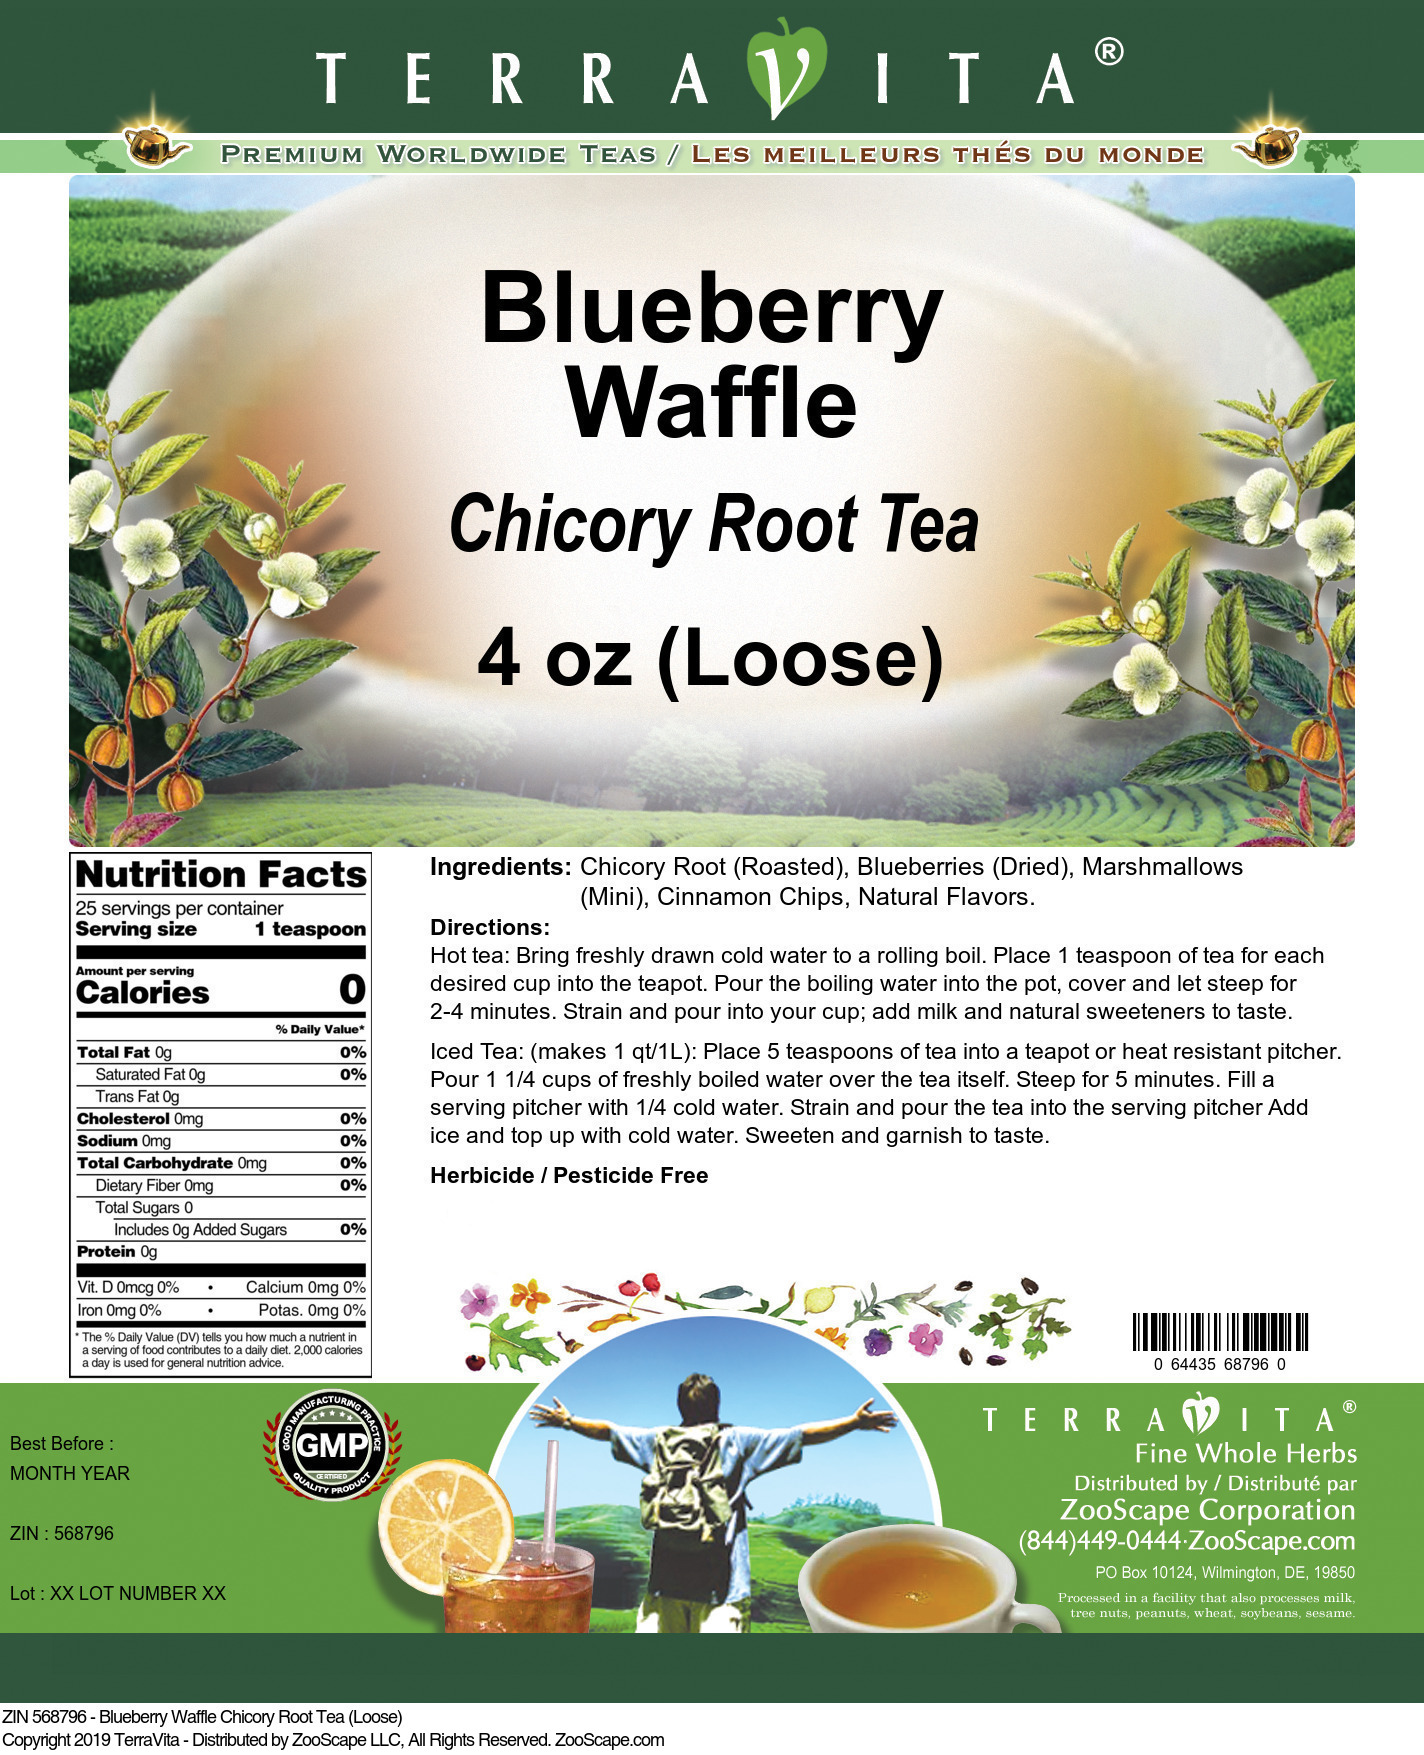 Blueberry Waffle Chicory Root Tea (Loose) - Label